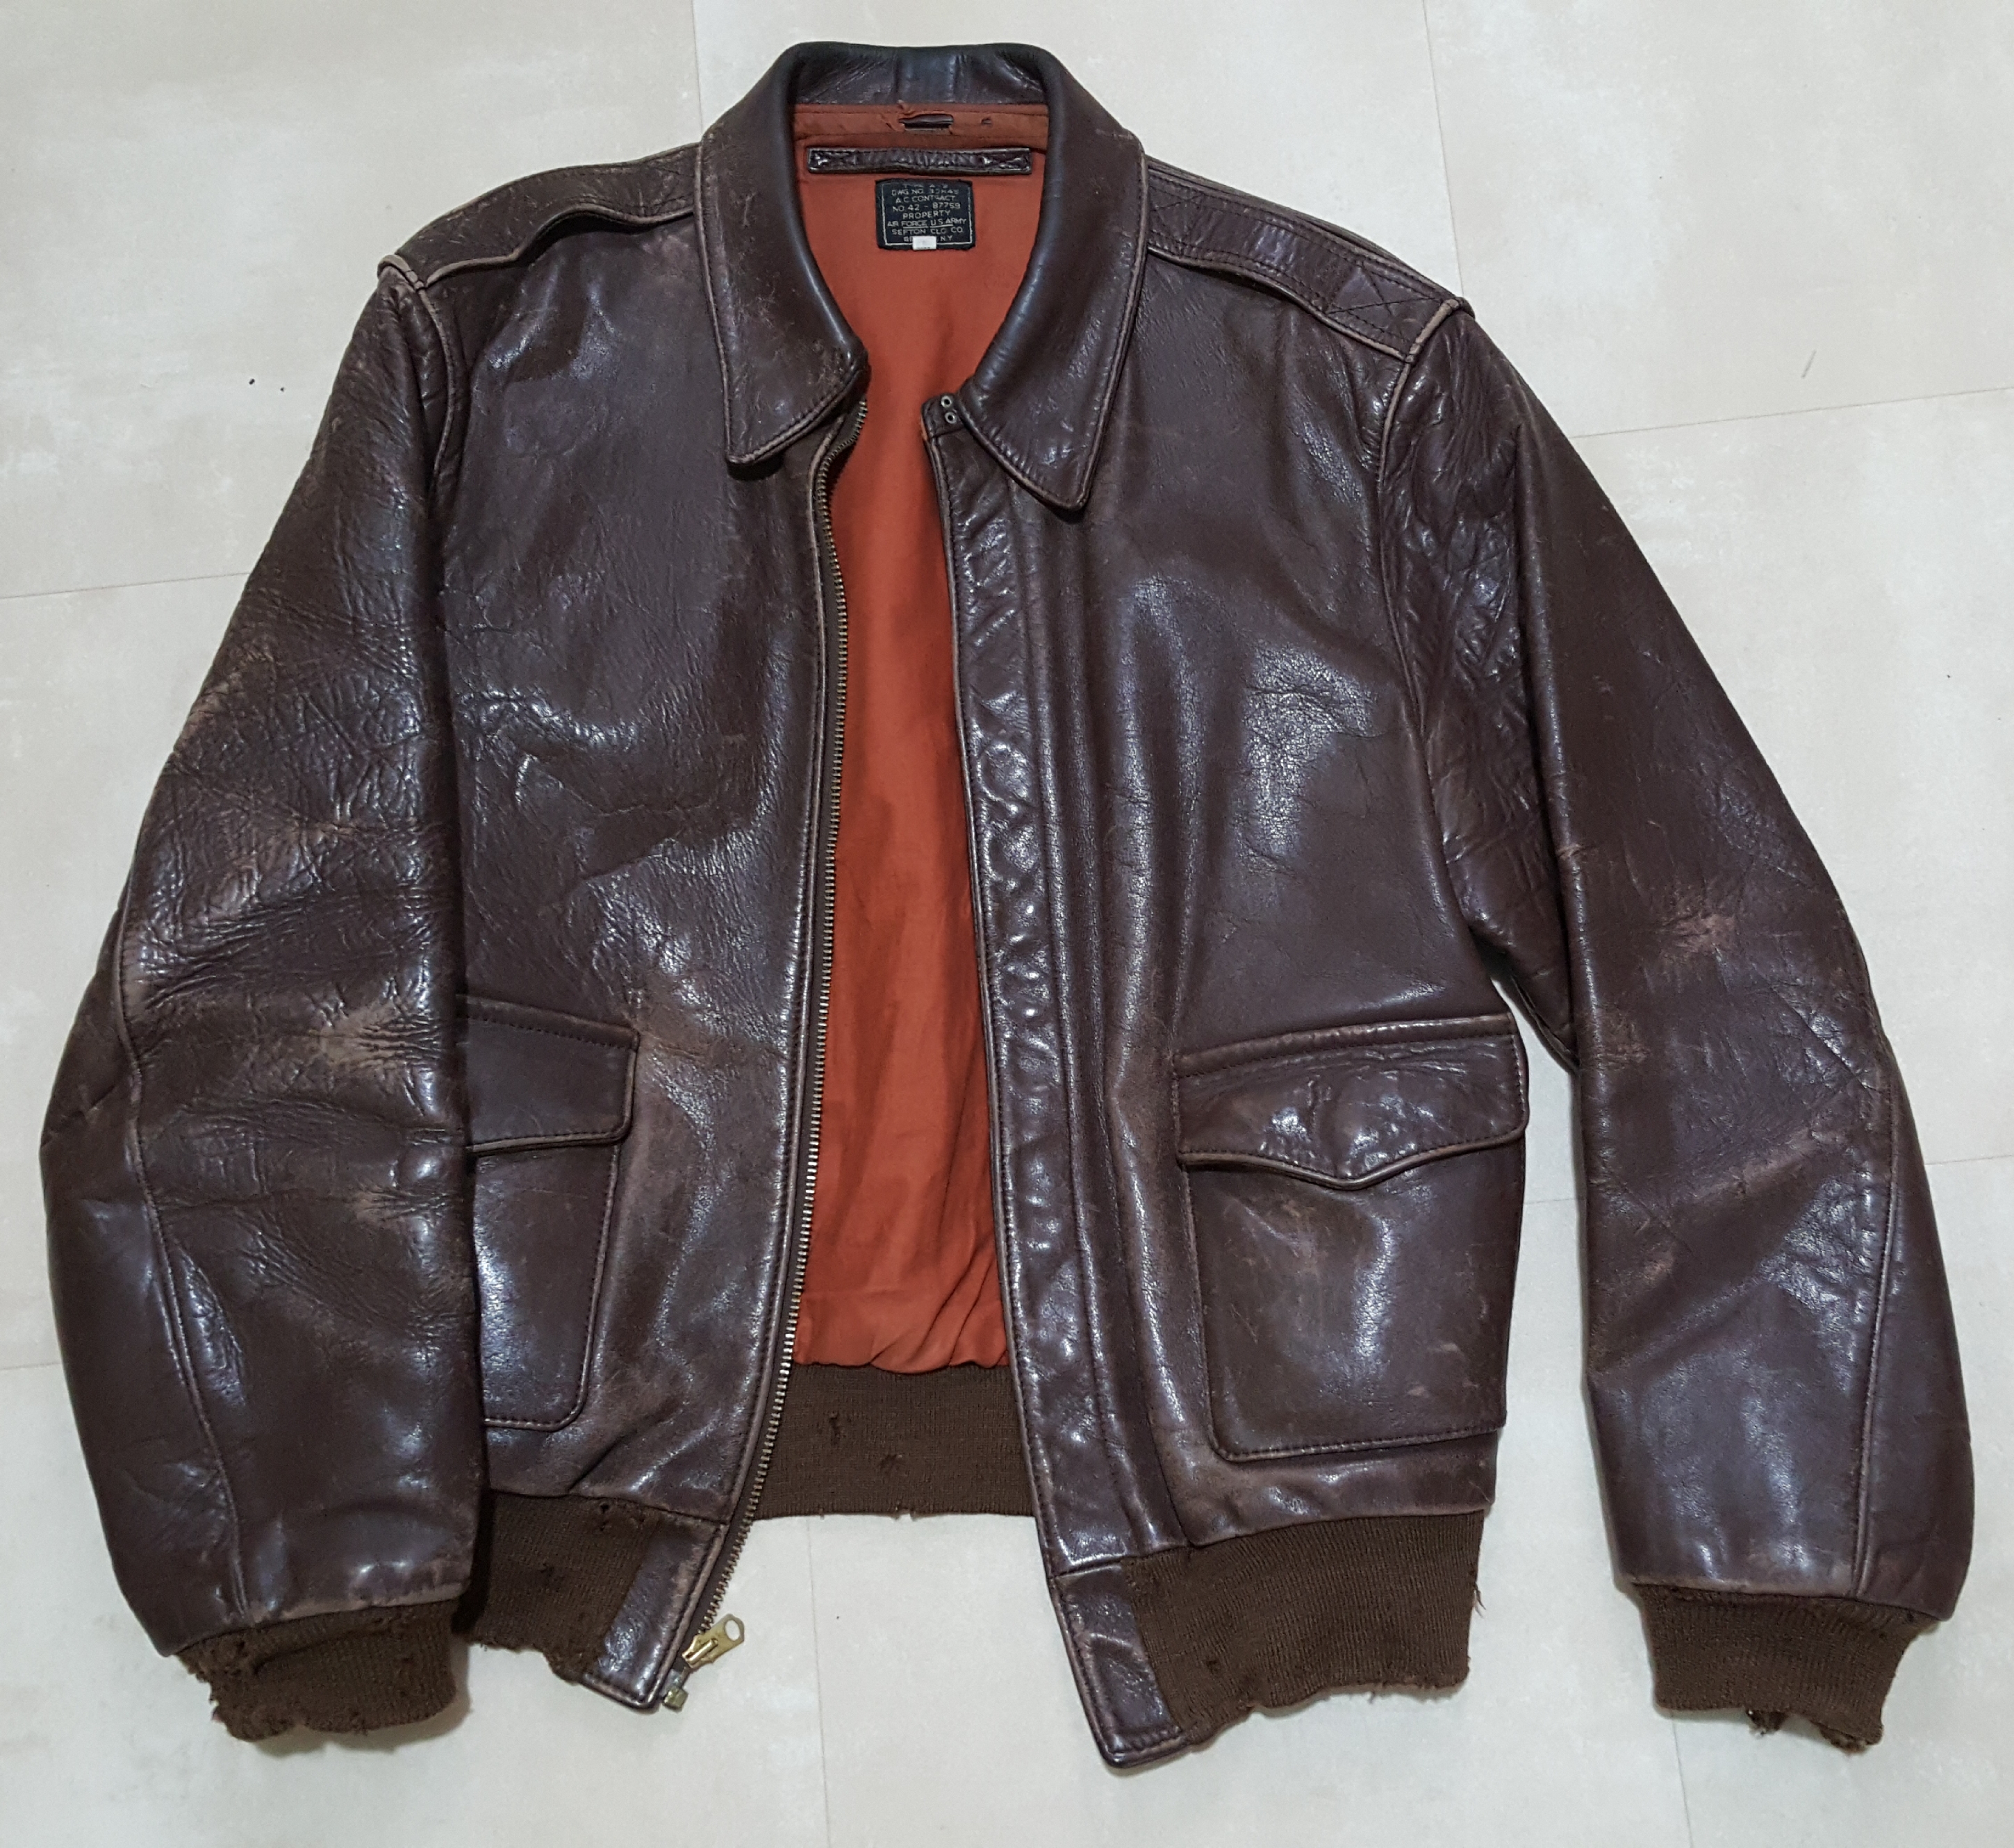 Repro A-2 Jackets with Hard Use--Let's see yours! | Page 4 | Vintage ...